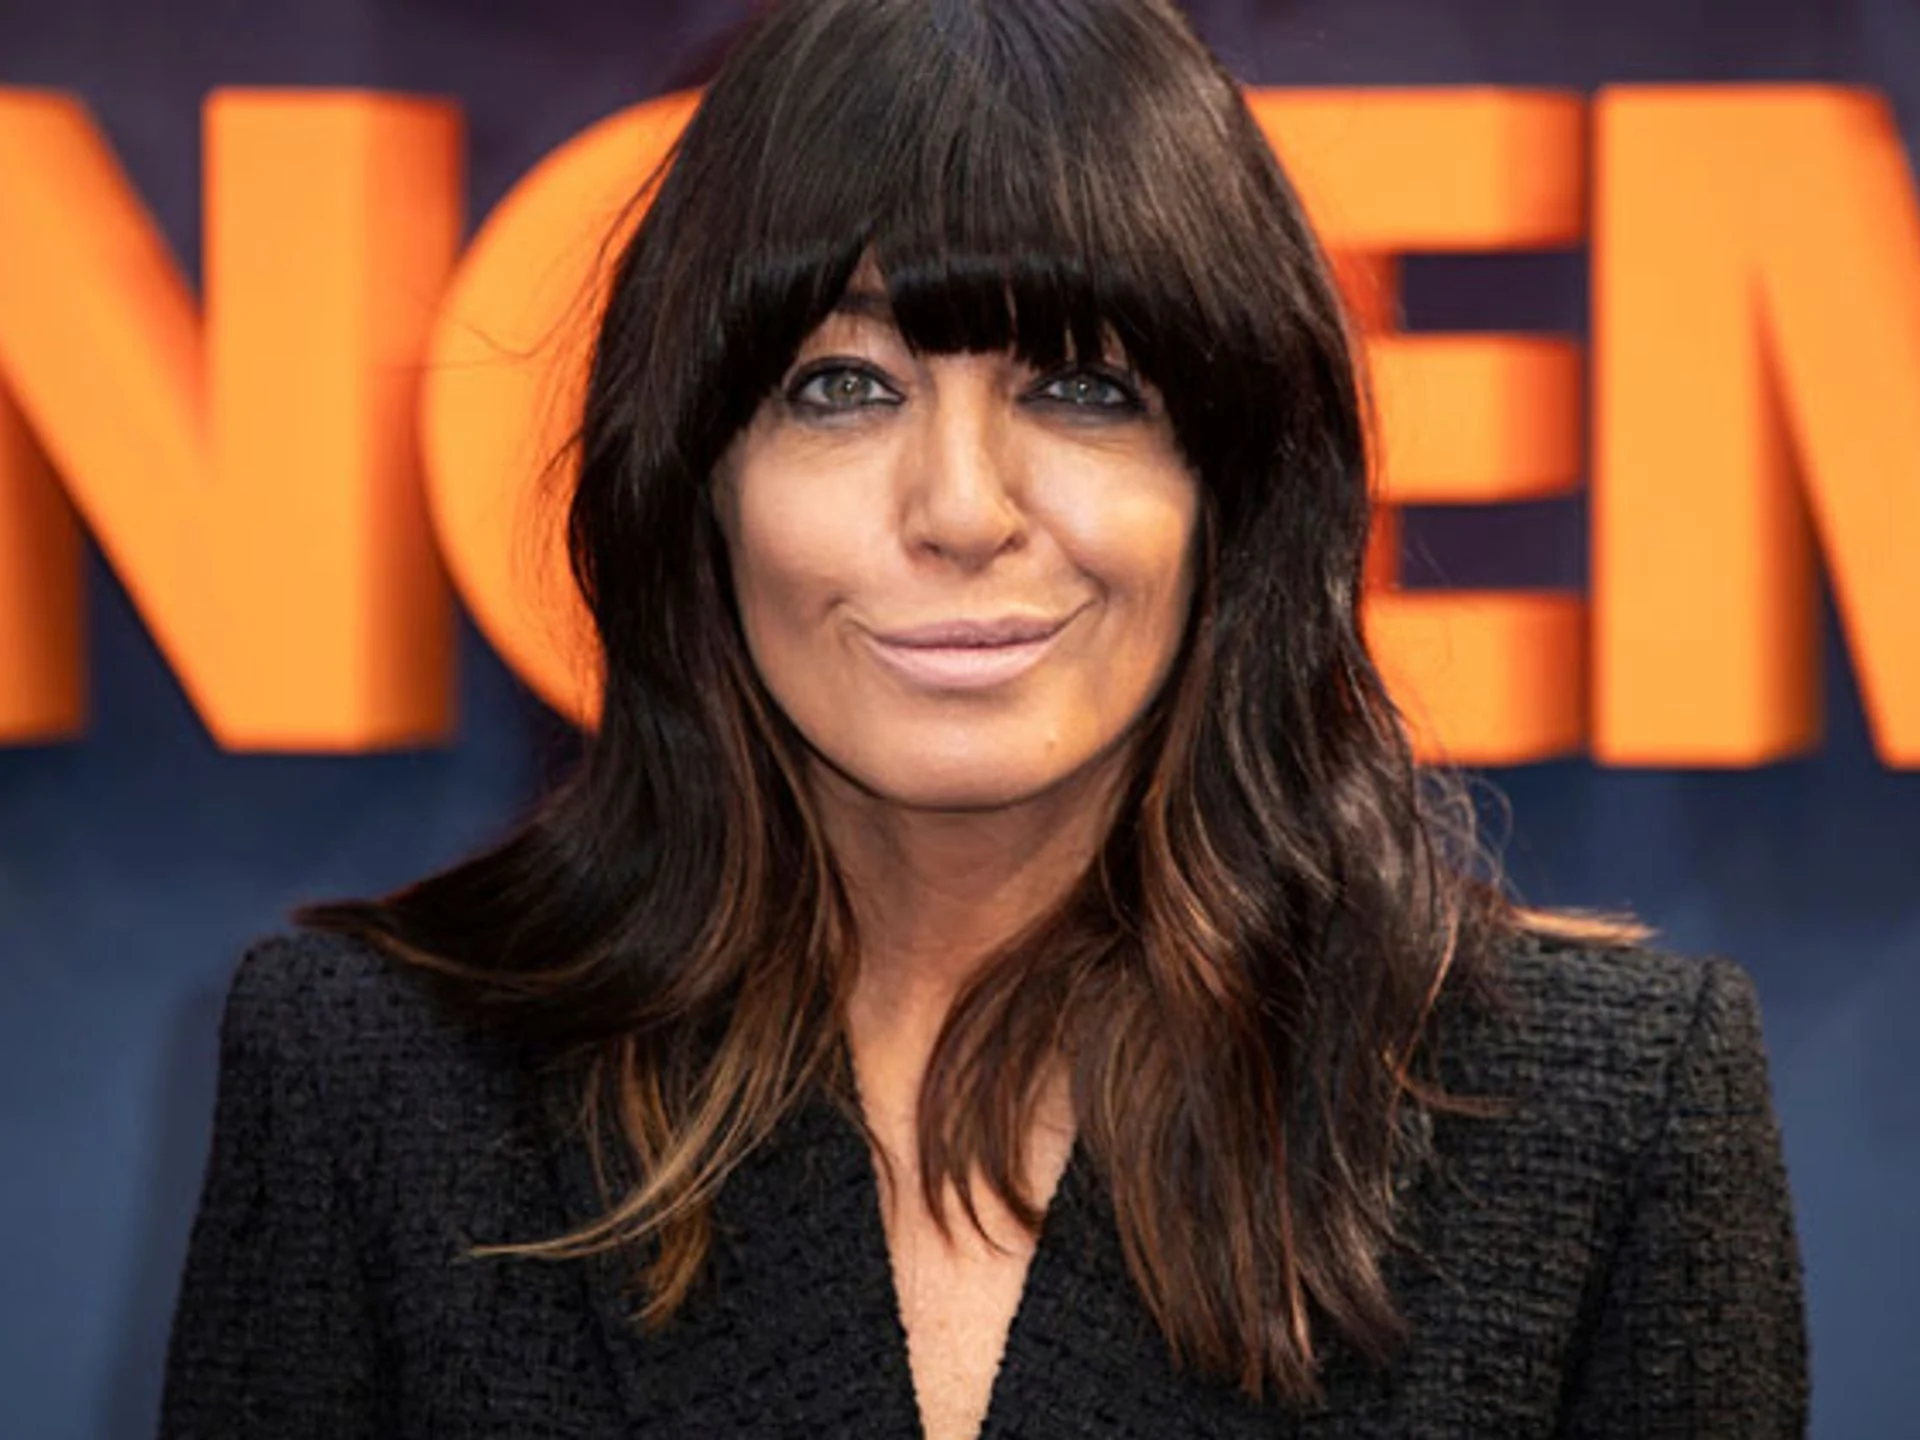 Icons of Influence: How Claudia Winkleman Shape Culture and Society